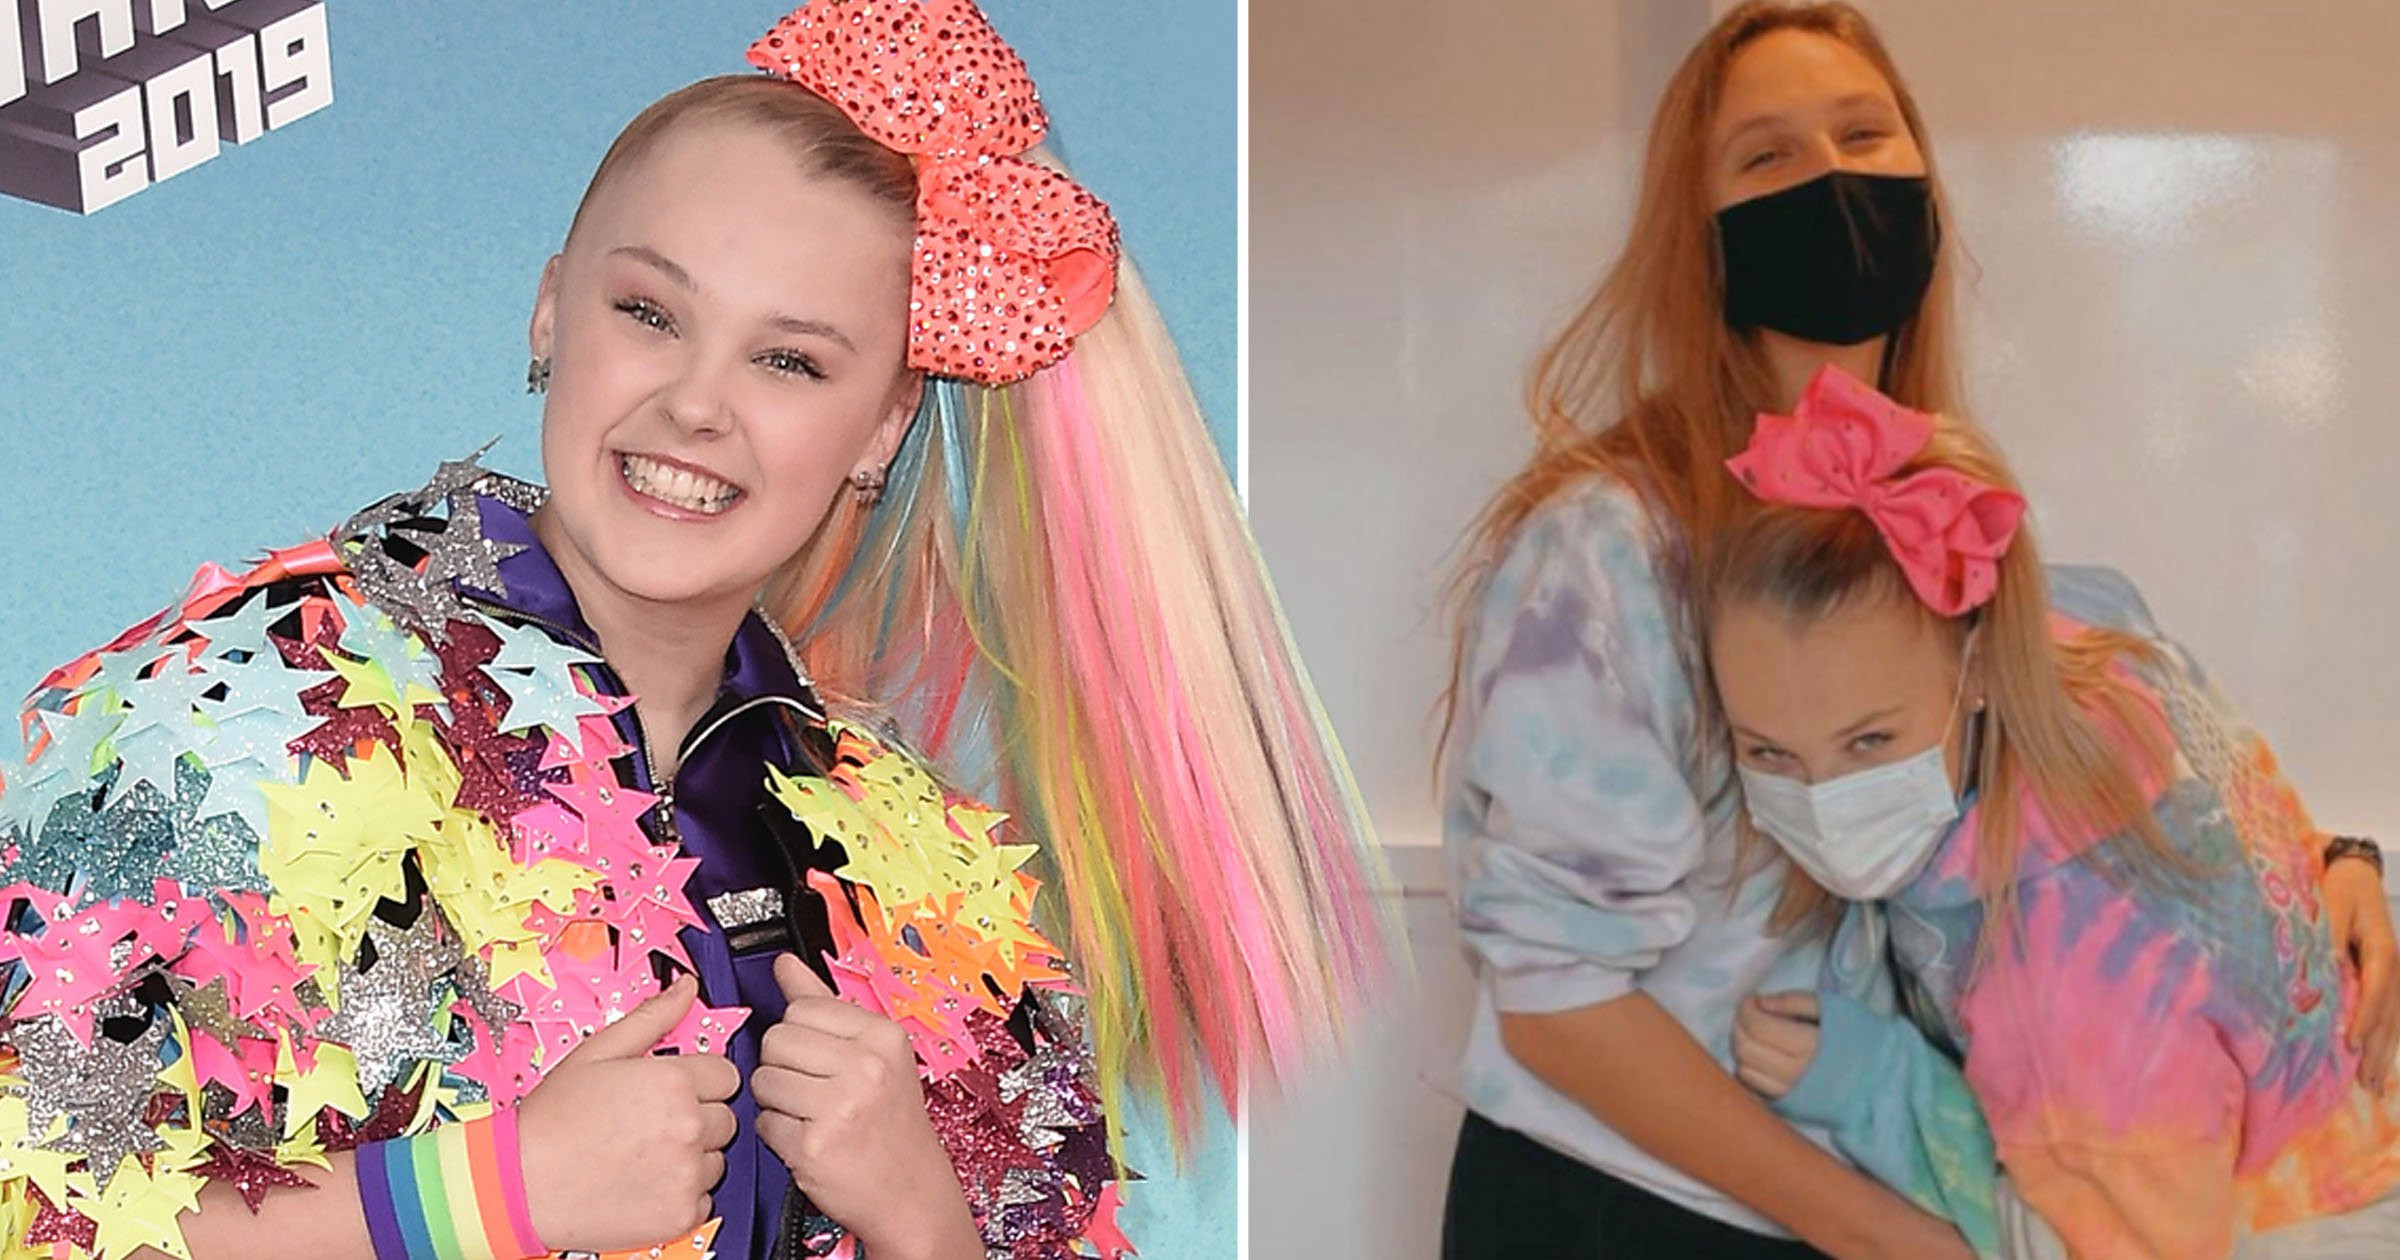 JoJo Siwa’s smitten girlfriend shares loved-up photos after going public: ‘Fall in love with your best friend’